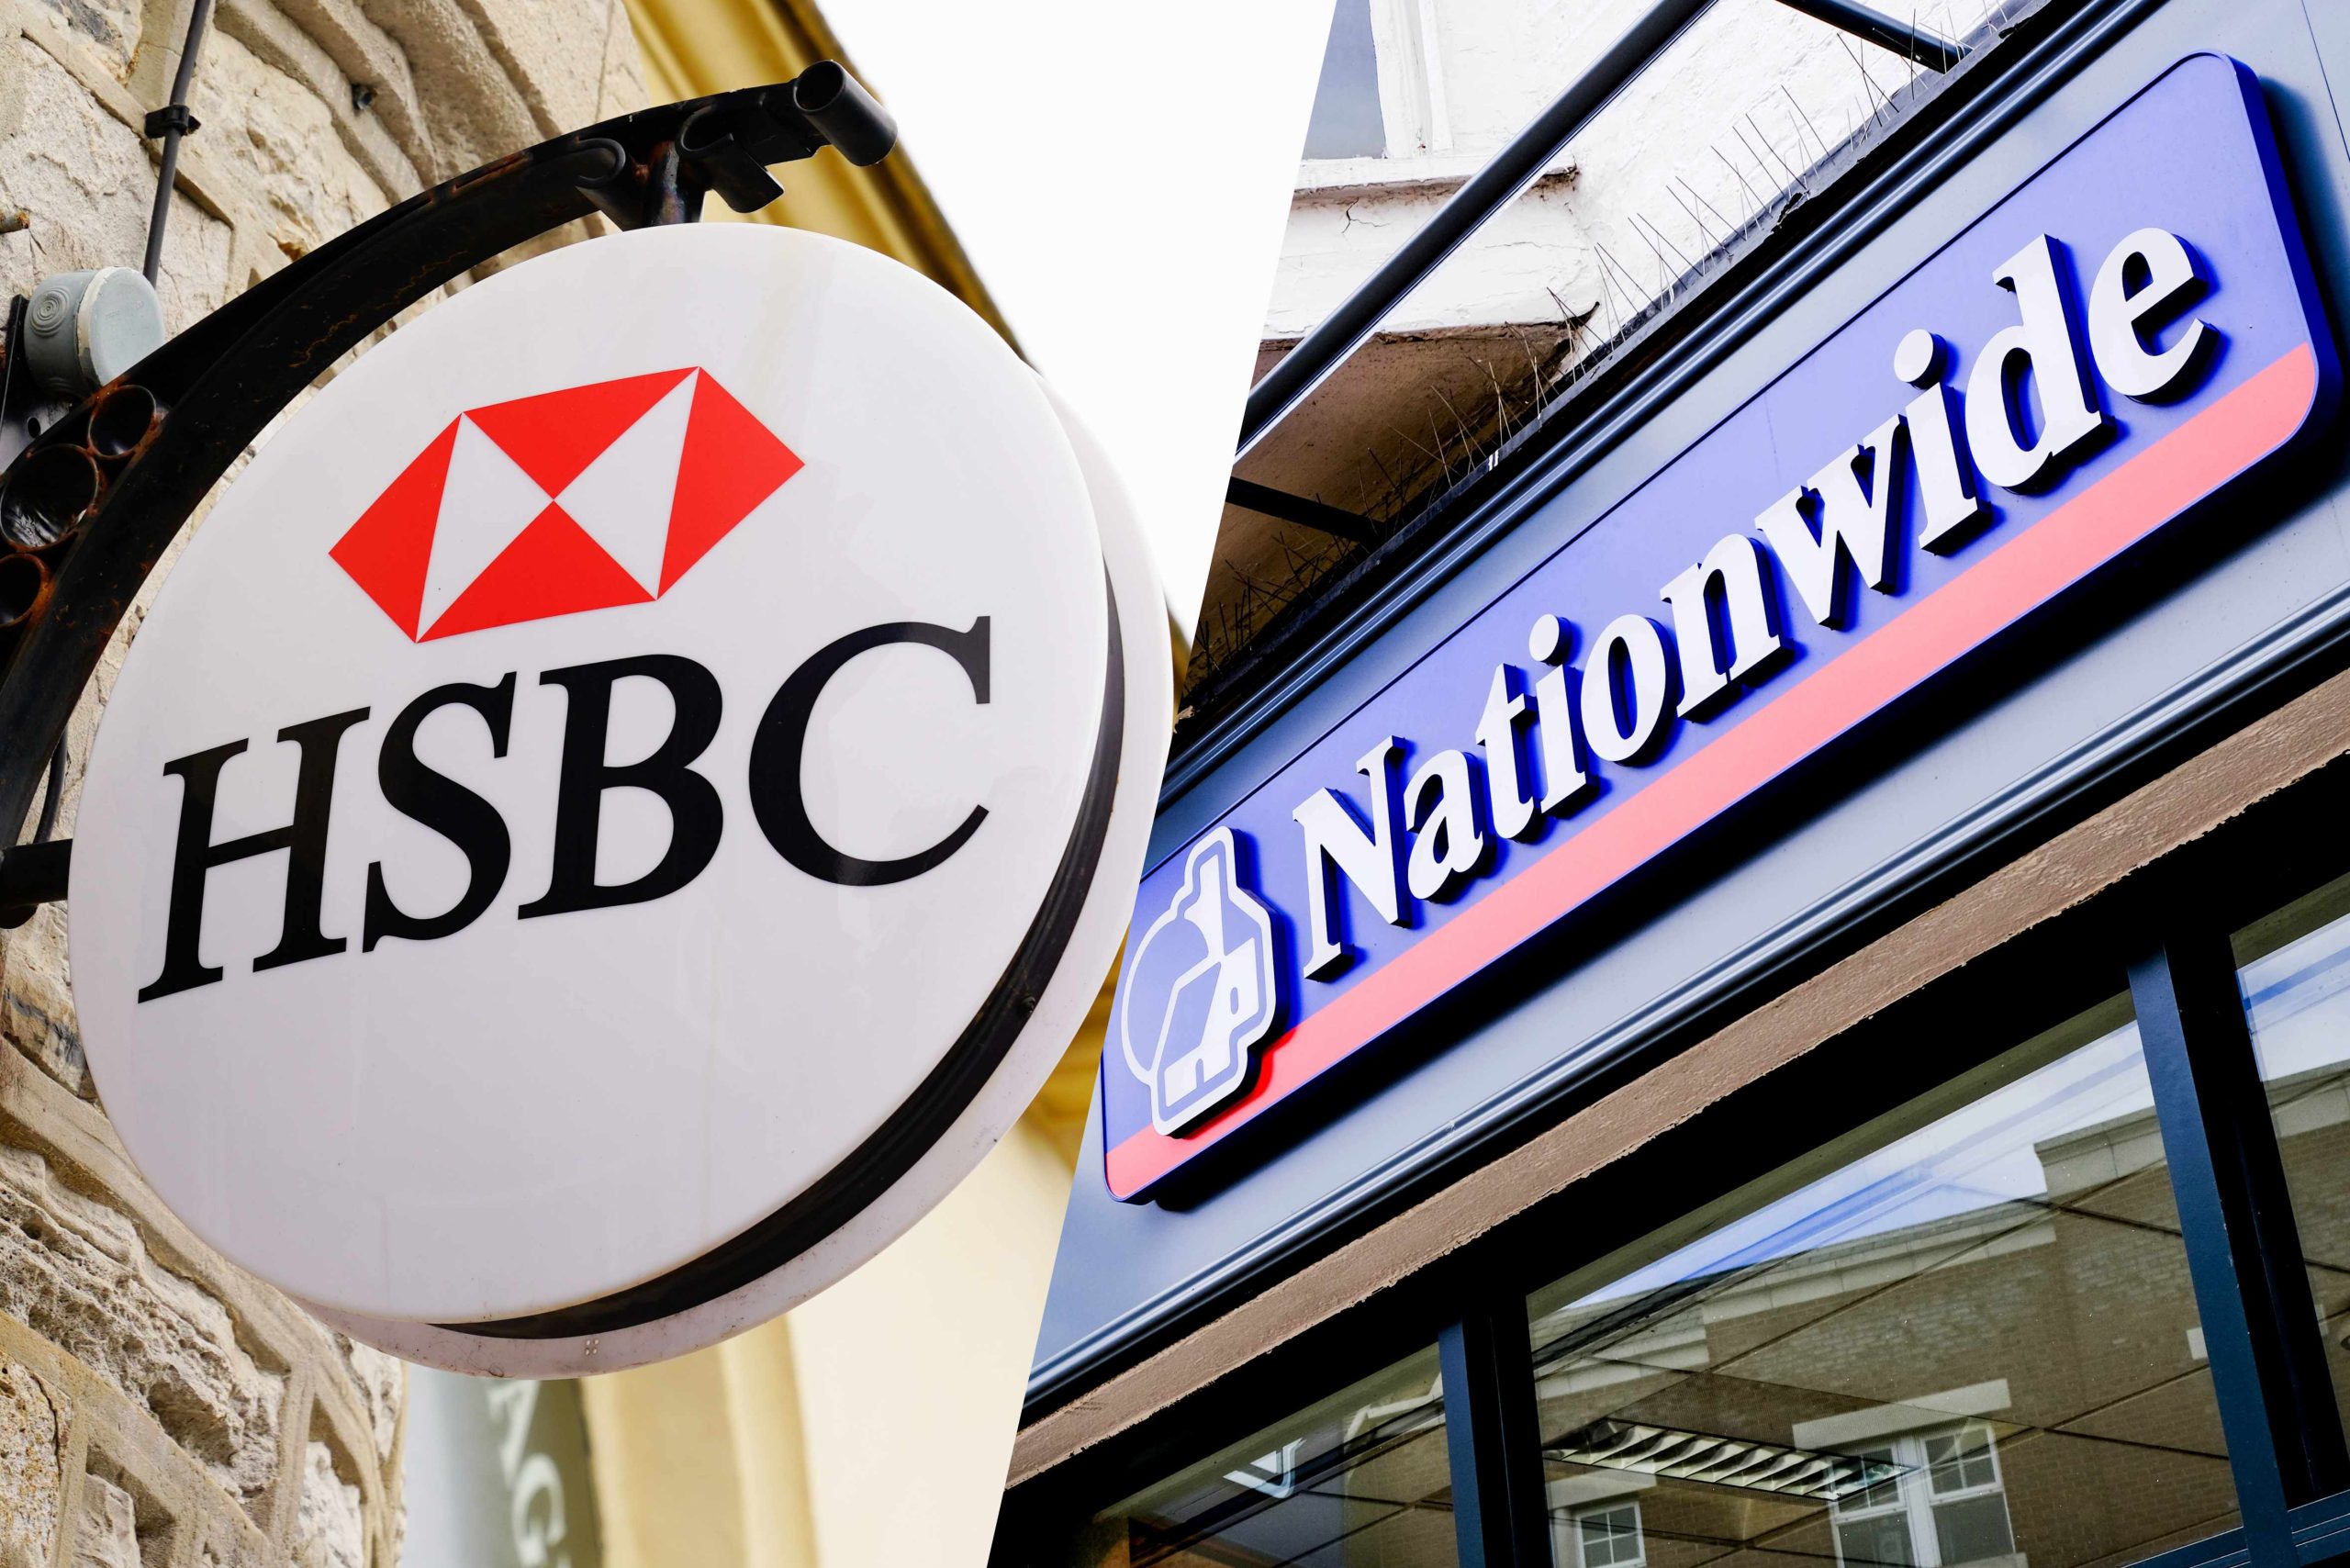 HSBC, Nationwide Impose New Restrictions on Cryptocurrency Purchases in UK – Featured Bitcoin News